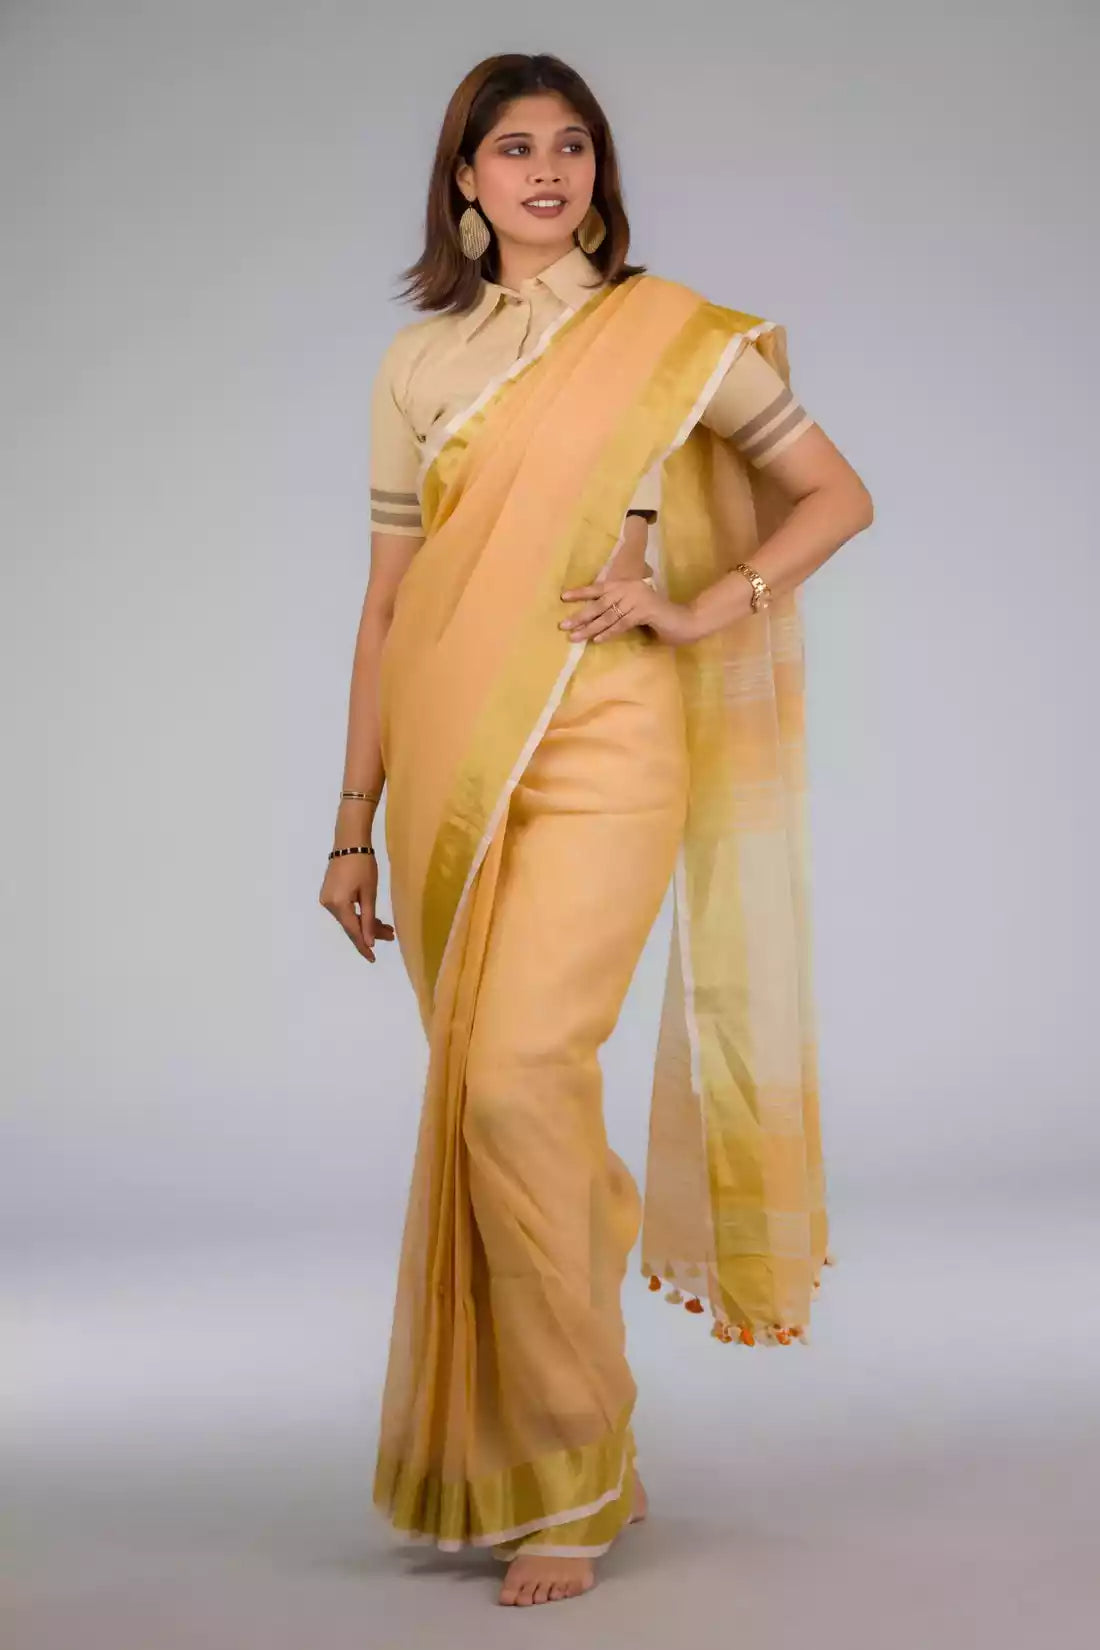 side look of a beautiful woman with short hair wearing beige saree with collared blouse